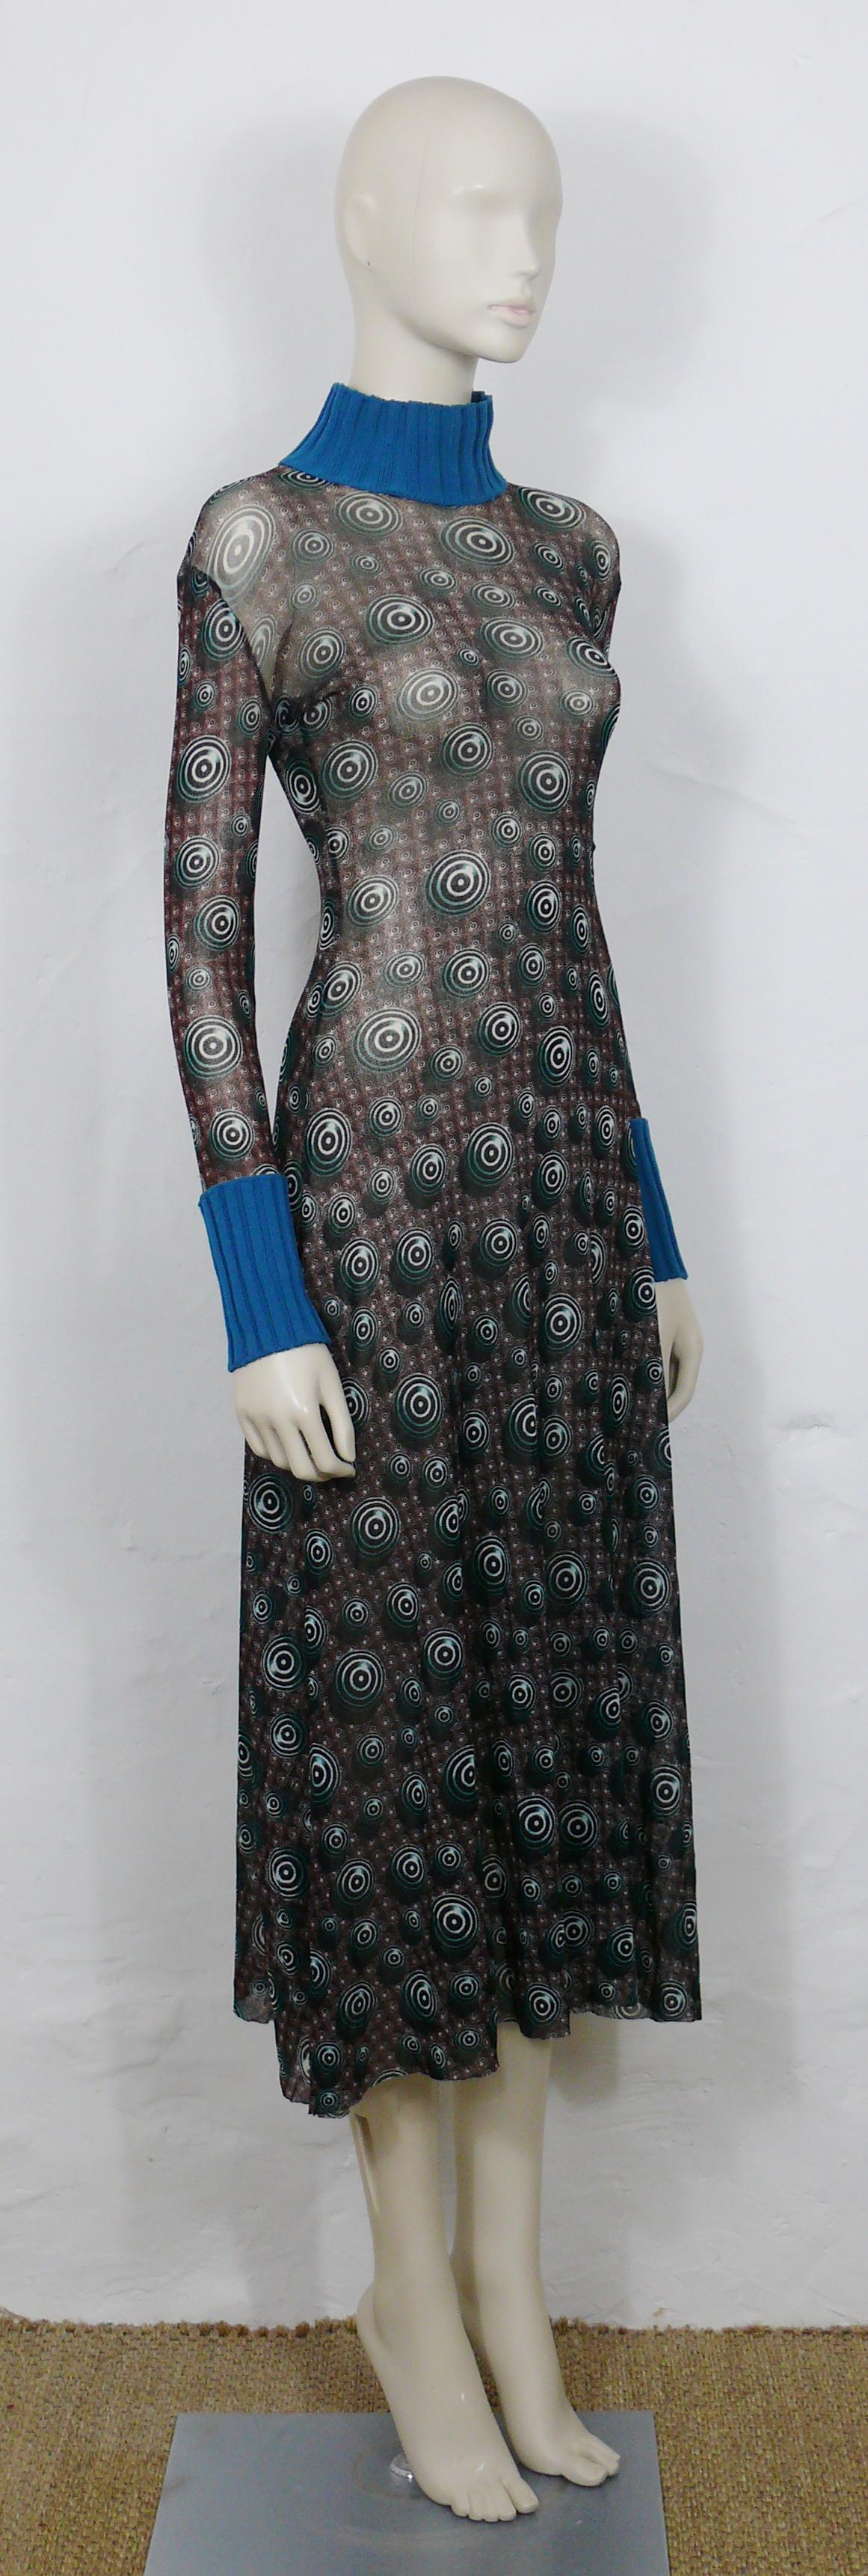 JEAN PAUL GAULTIER vintage sheer mesh dress featuring an opulent abstract Op Art circles print all over.

This jumpsuit features :
- FUZZI sheer mesh.
- Long sleeves.
- Duck blue color knitted collar and cuffs.
- Has stretch.
- Slips on.
-